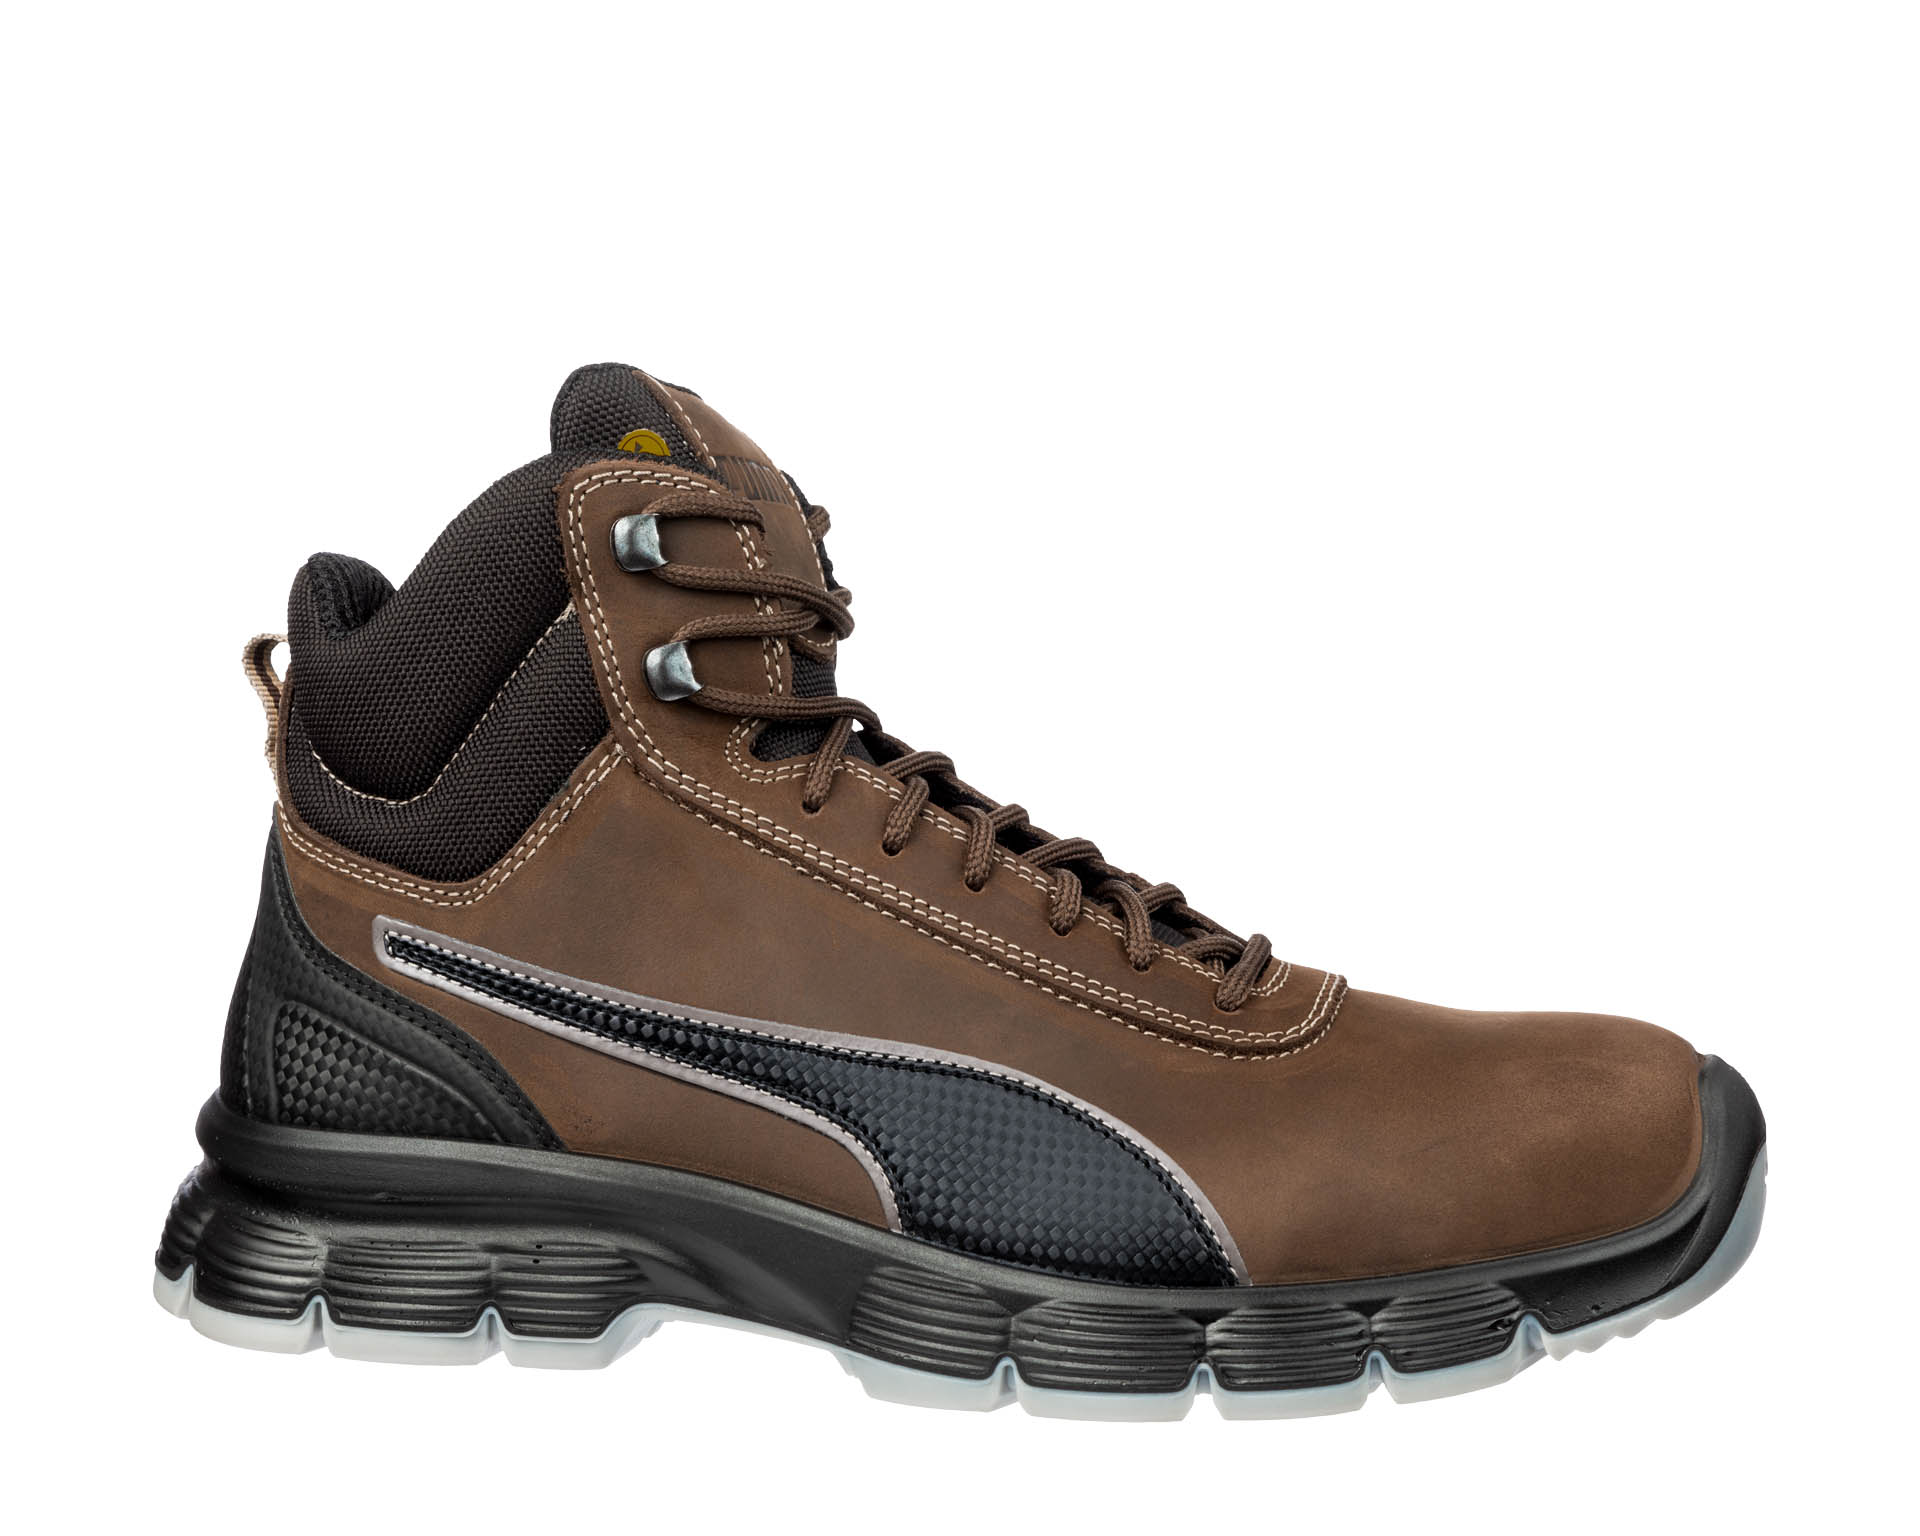 S3 SRC MID shoes Puma Safety ESD | BROWN safety SAFETY CONDOR English PUMA